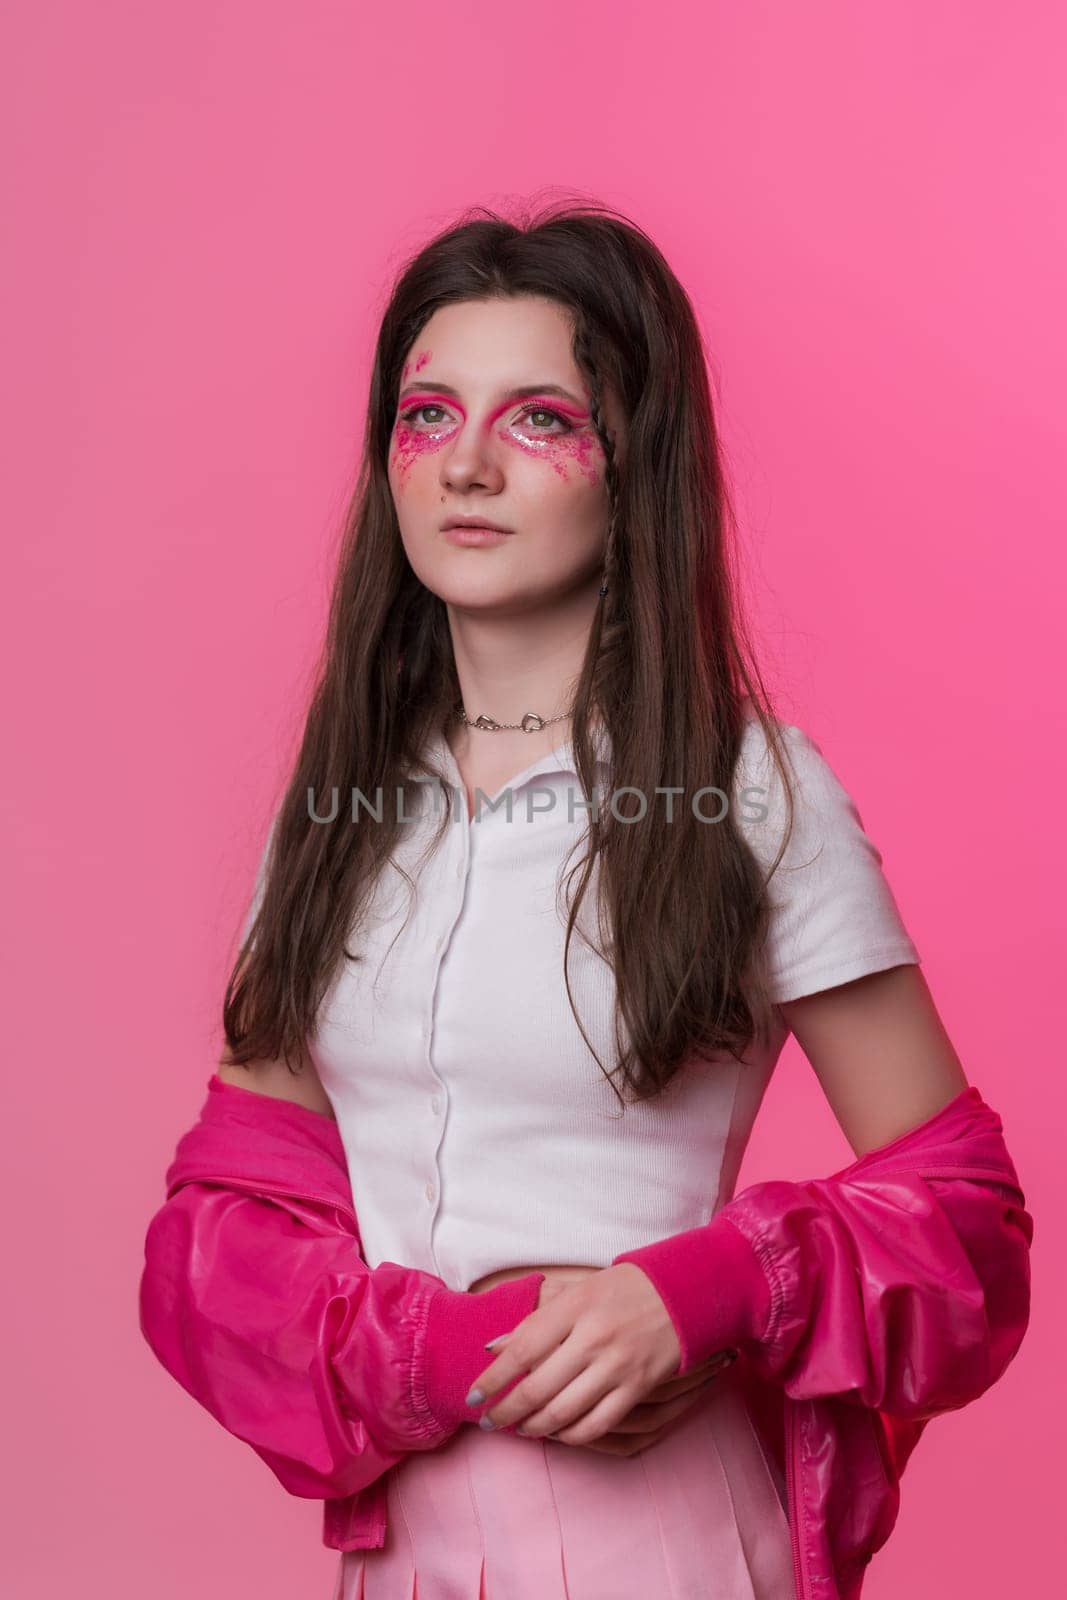 Portrait of female with pink make-up with sparkles and arrows, dressed in pink jacket, skirt and white t-shirt. Studio shot of pretty hipster Caucasian woman on pink background. Part of photo series